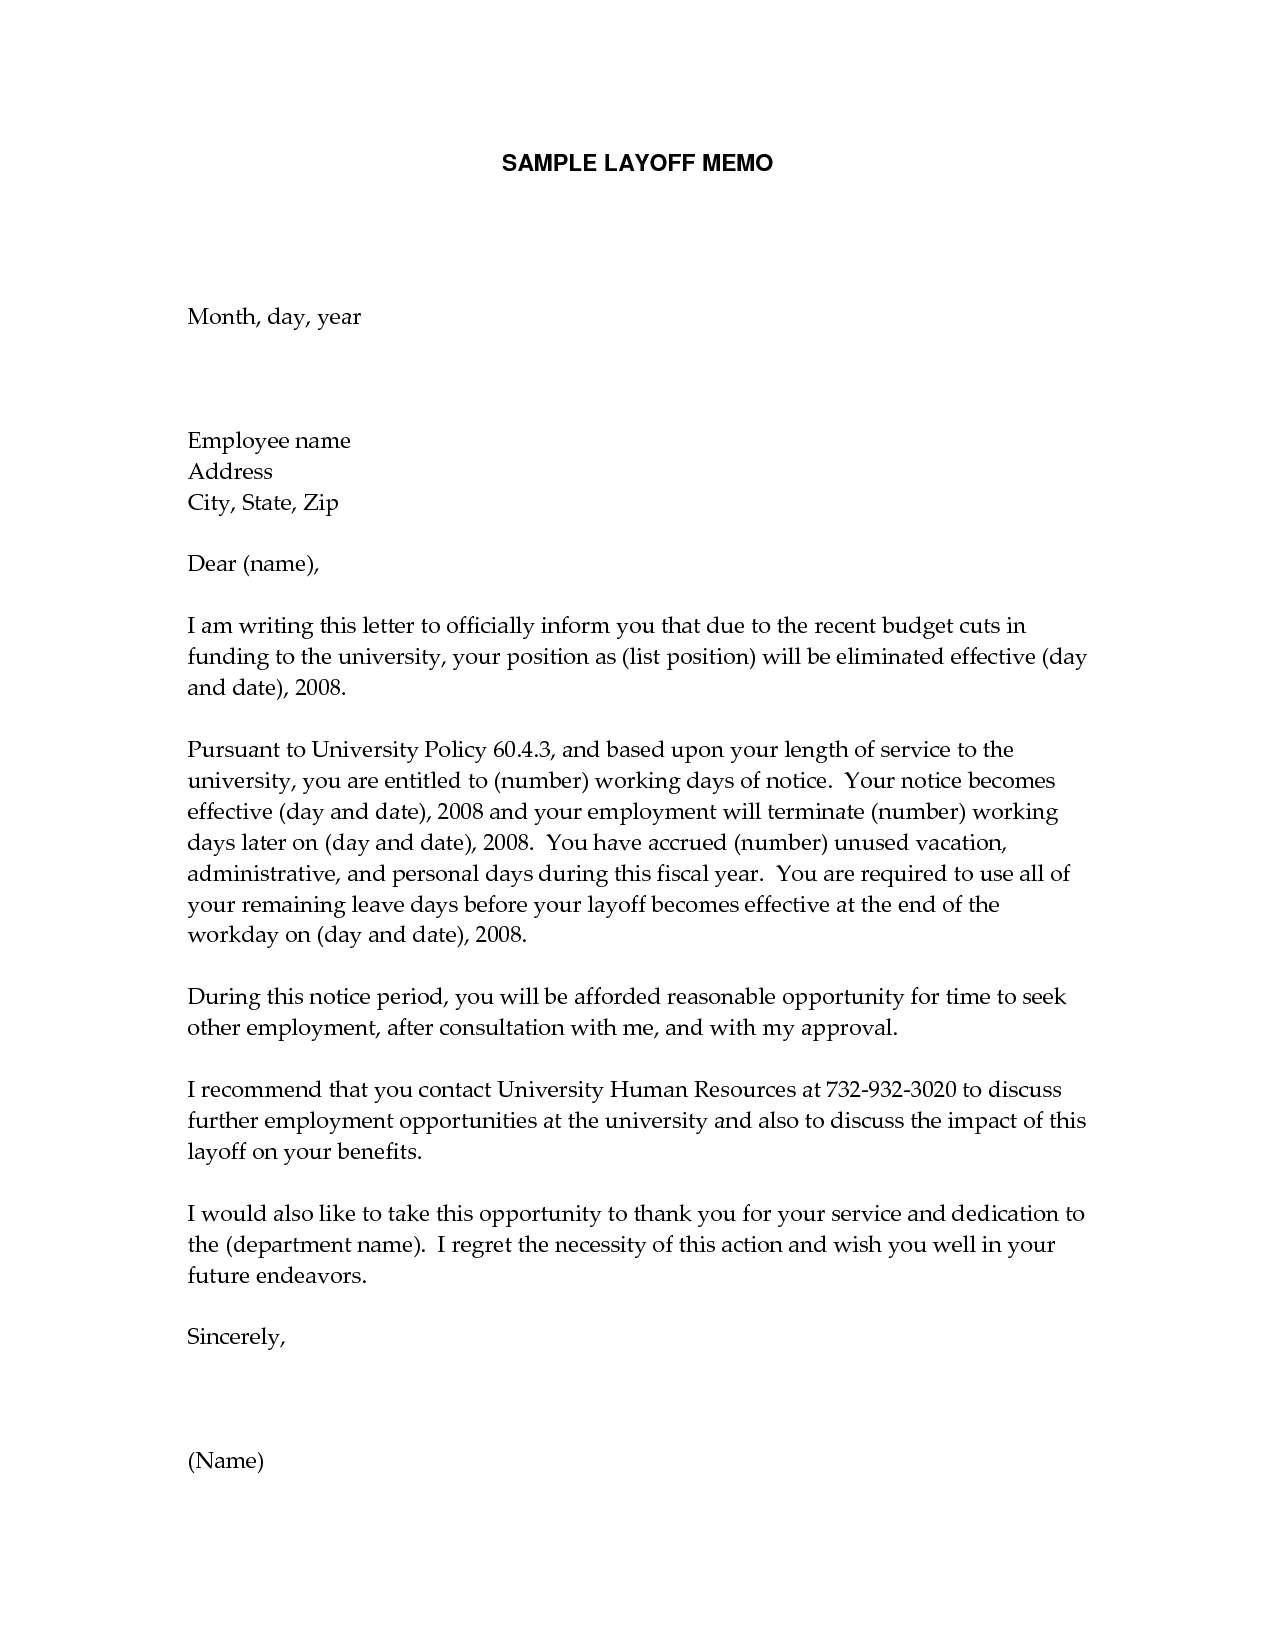 layoff letter template example-Thank you letter after layoff image collections letter format layoff letter sample icebergcoworking icebergcoworking layoff letter 6-o